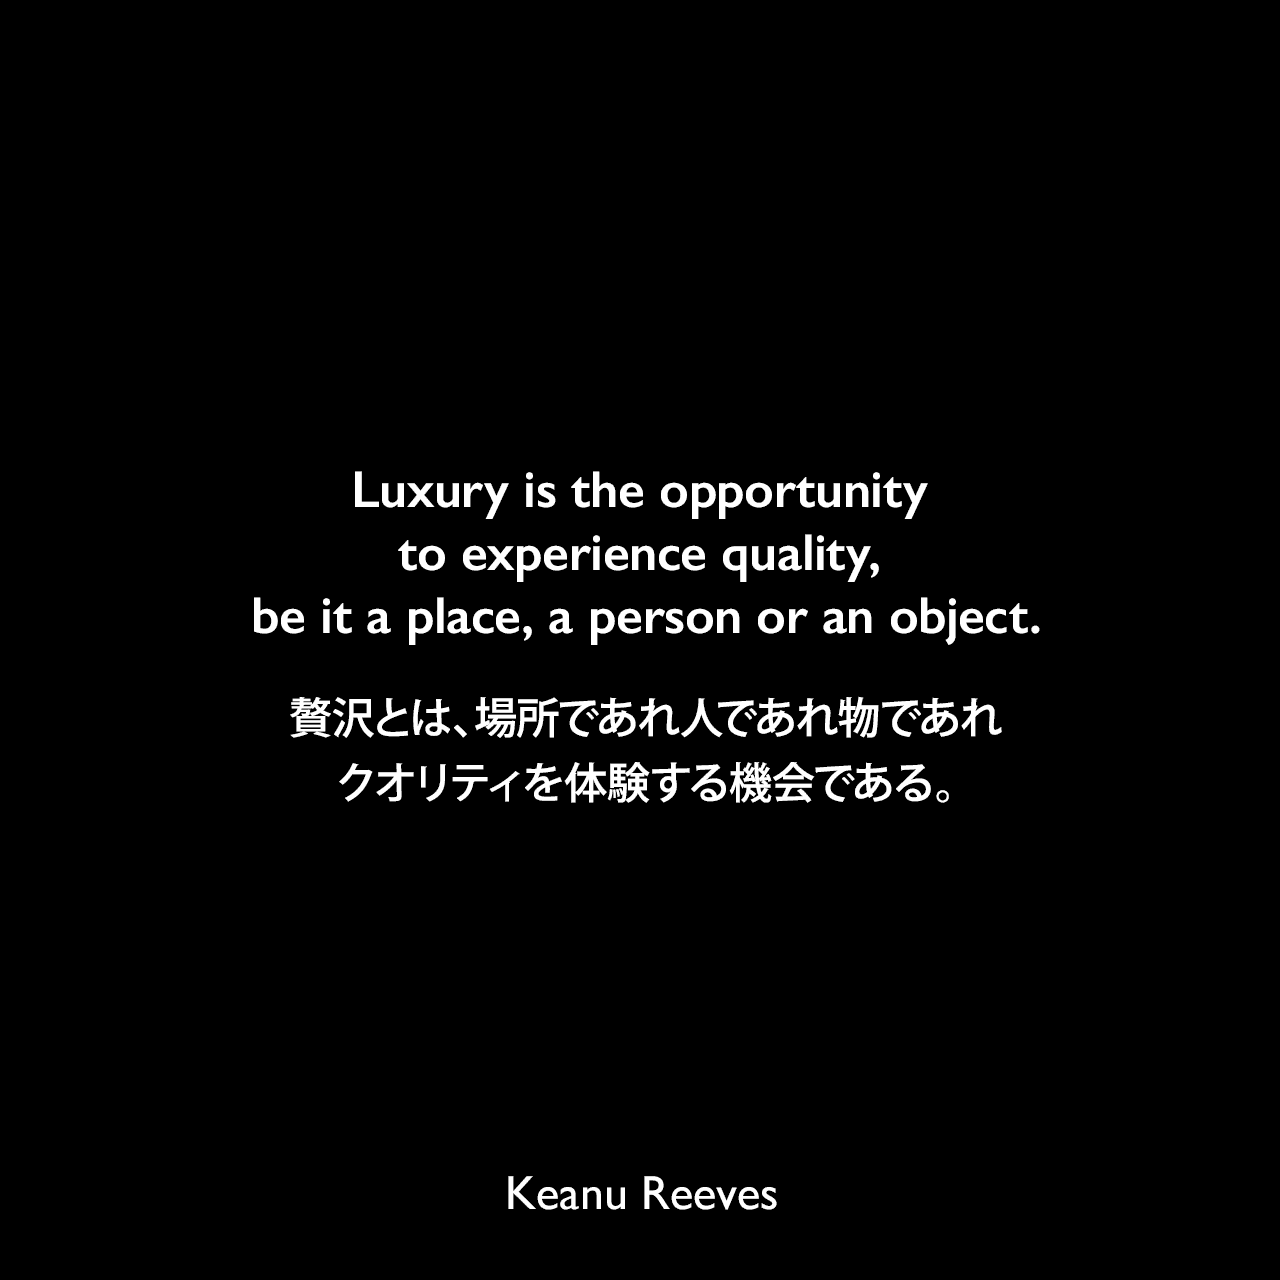 Luxury is the opportunity to experience quality, be it a place, a person or an object.贅沢とは、場所であれ人であれ物であれ、クオリティを体験する機会である。Keanu Reeves